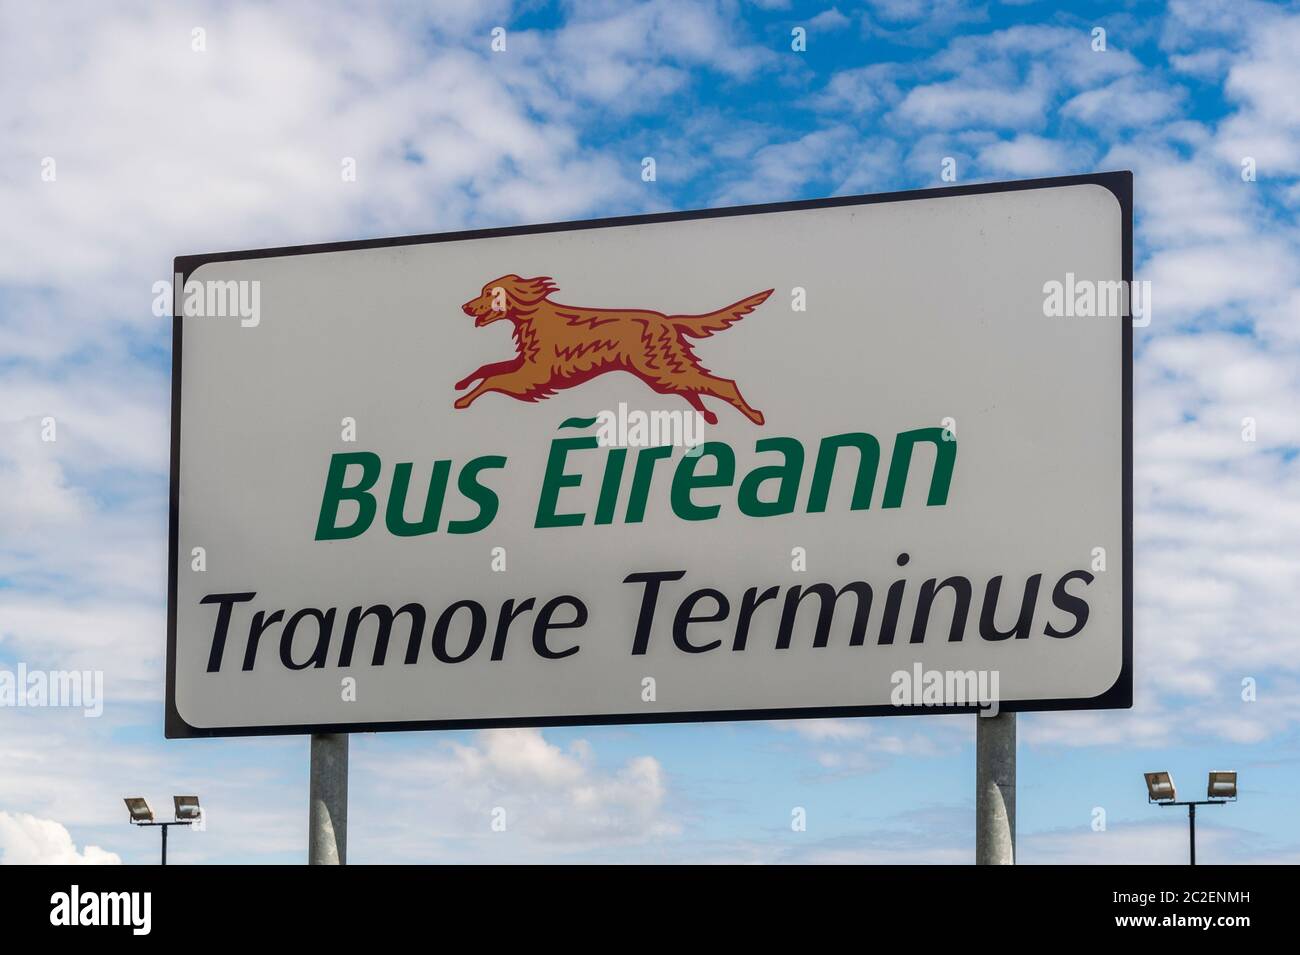 Bus Éireann Terminus at Tramore, County Waterford, Ireland. Stock Photo